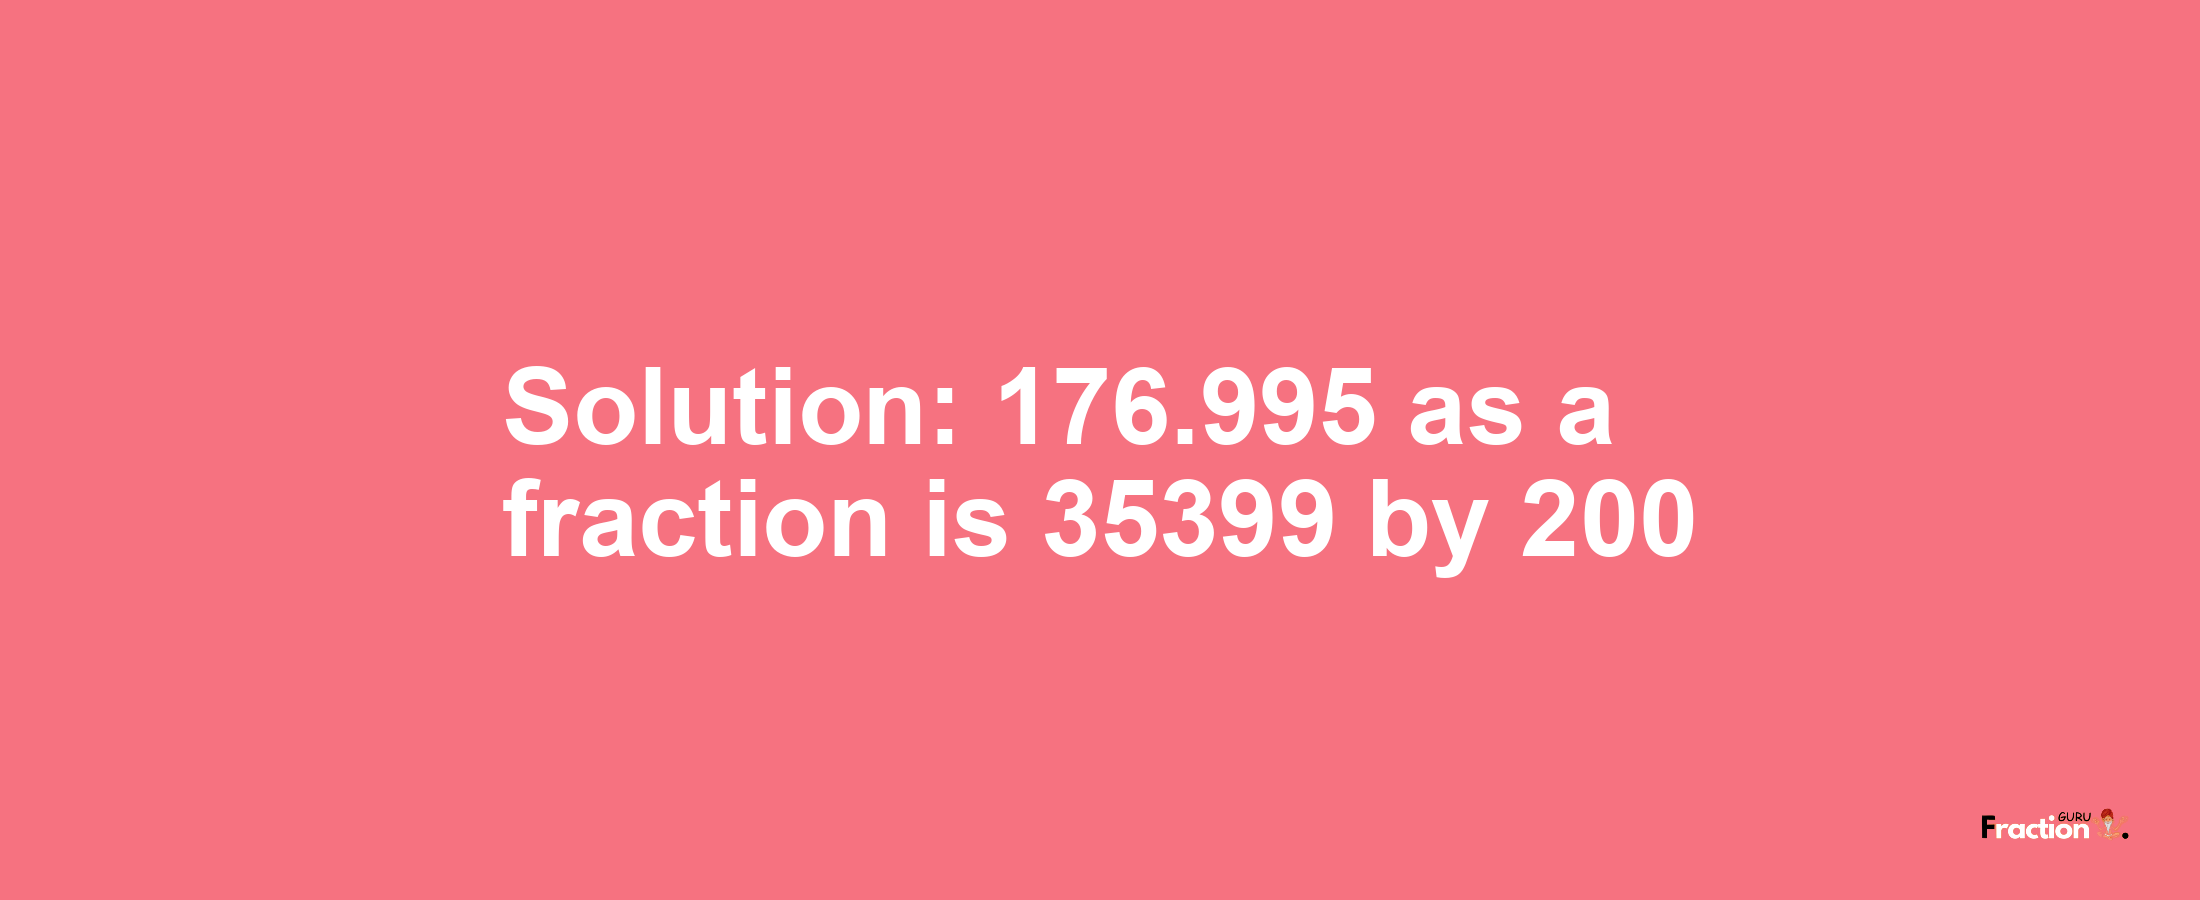 Solution:176.995 as a fraction is 35399/200